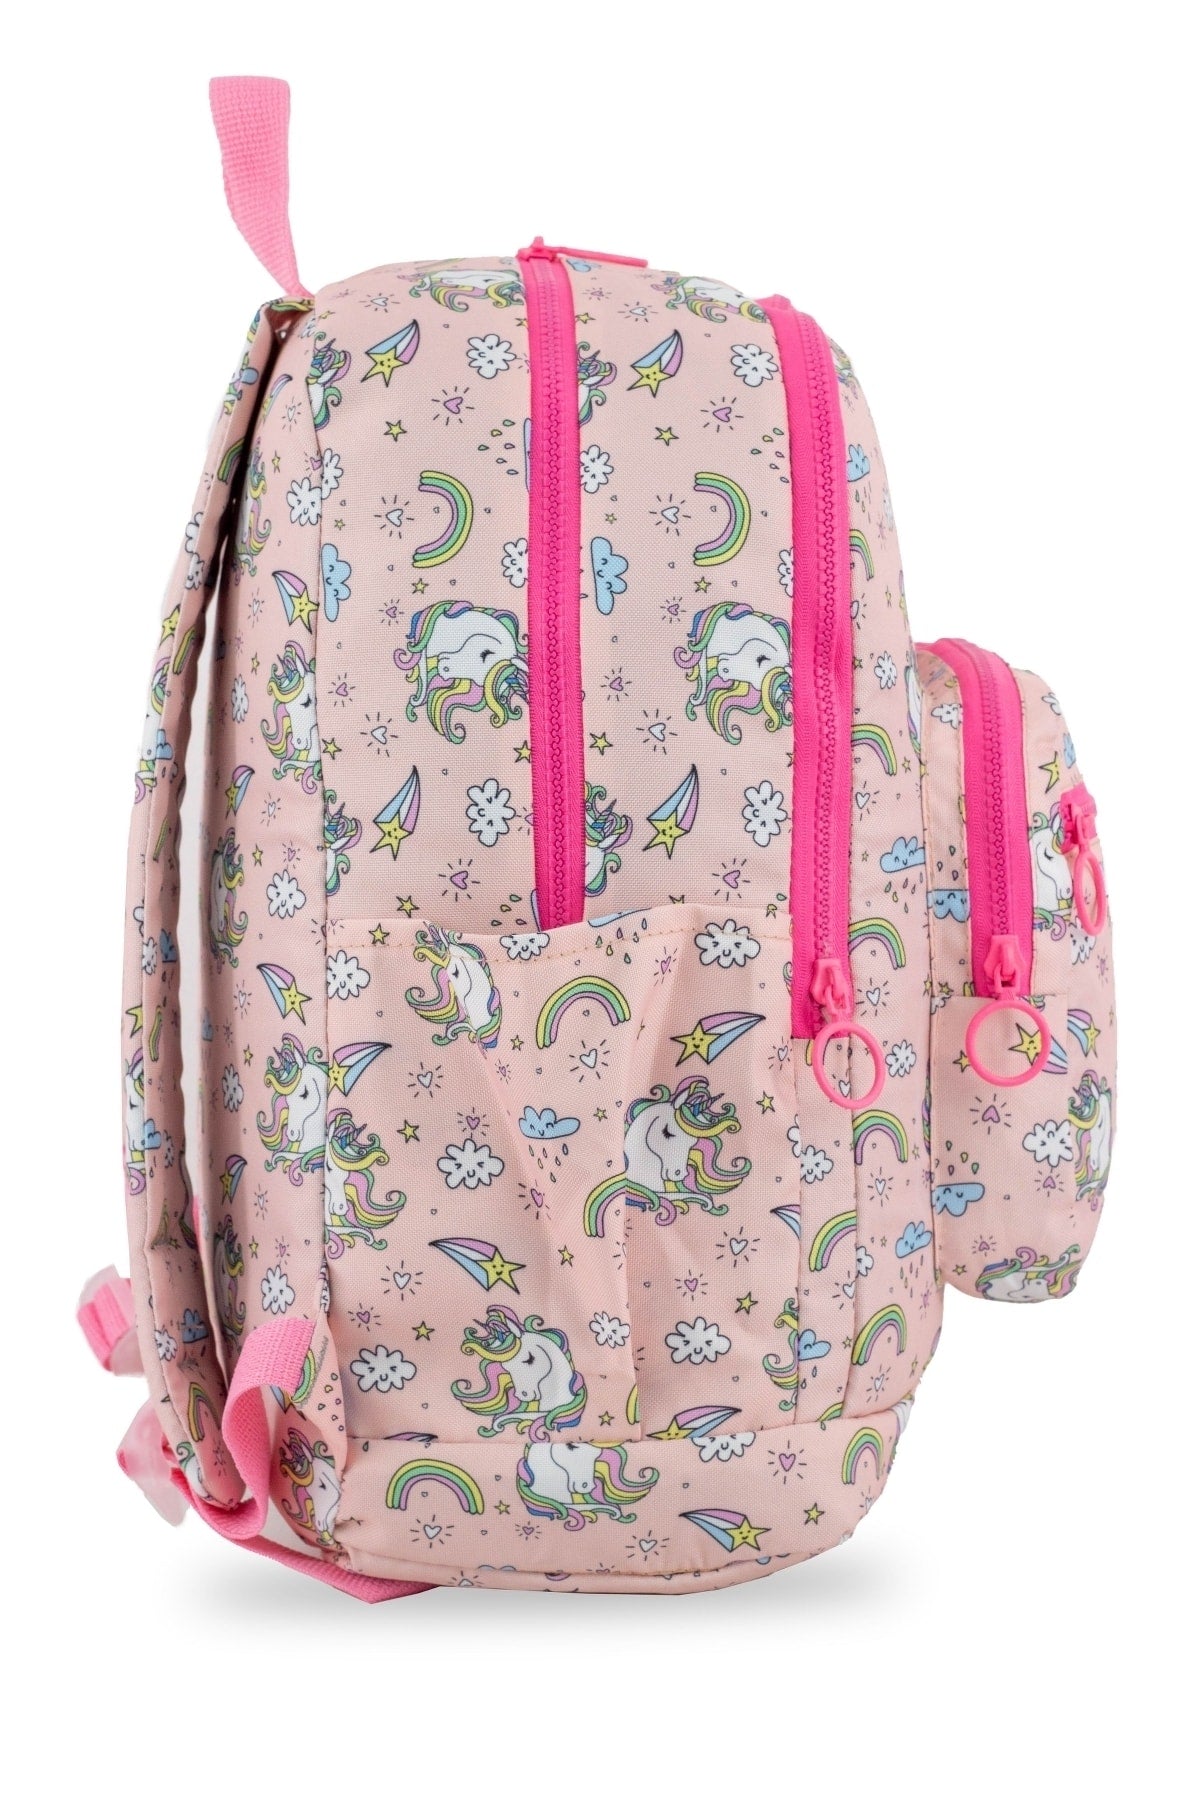 Rainbow Unicorn Pattern Pink 4-Compartment Washable Girls Primary School Backpack